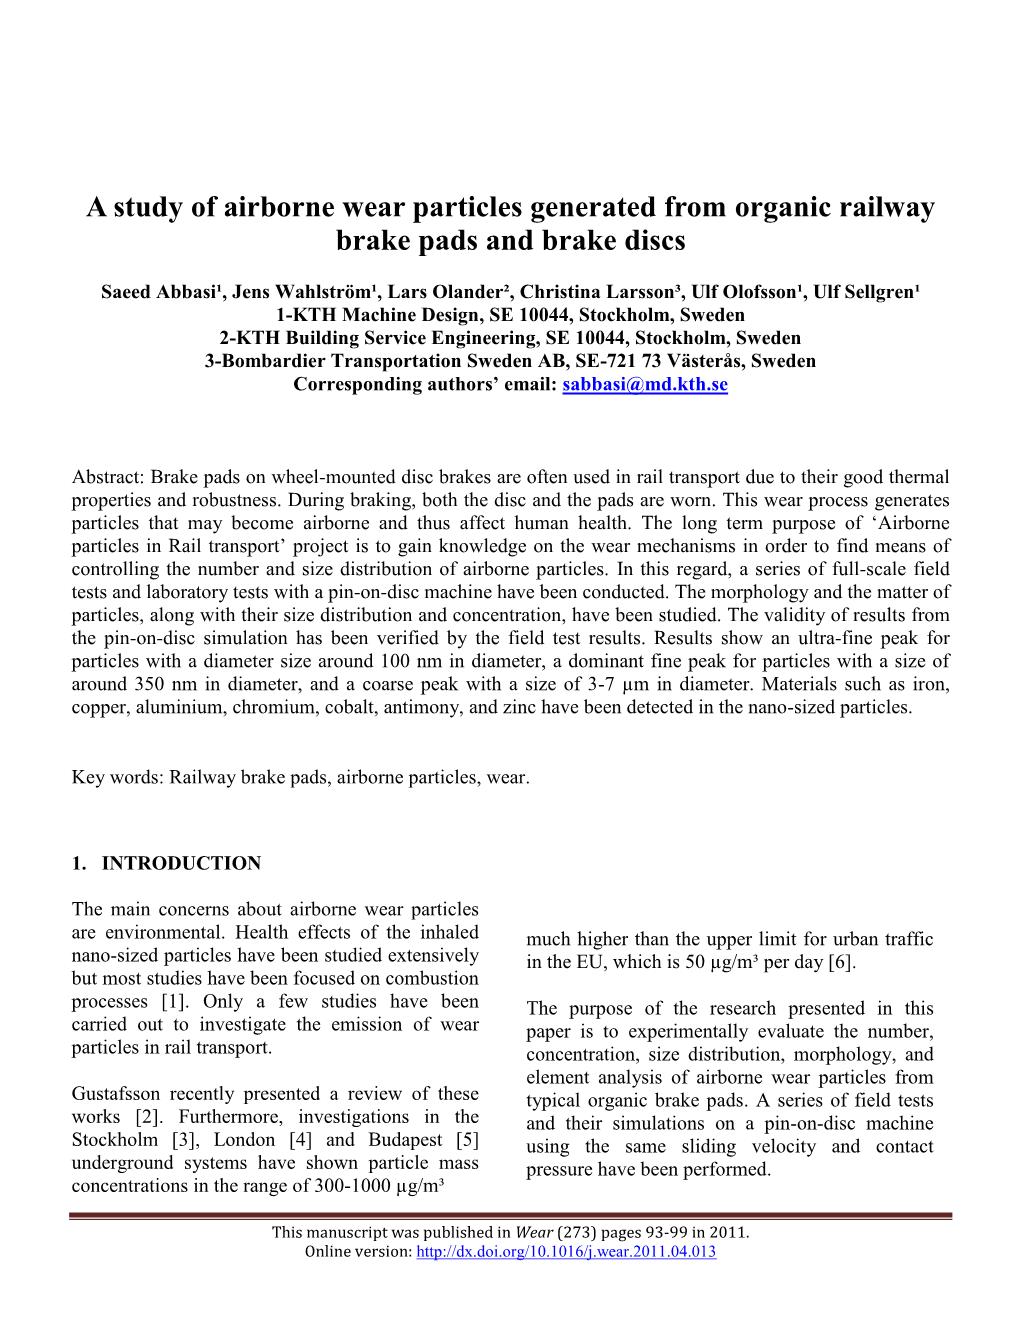 A Study of Airborne Wear Particles Generated from Organic Railway Brake Pads and Brake Discs